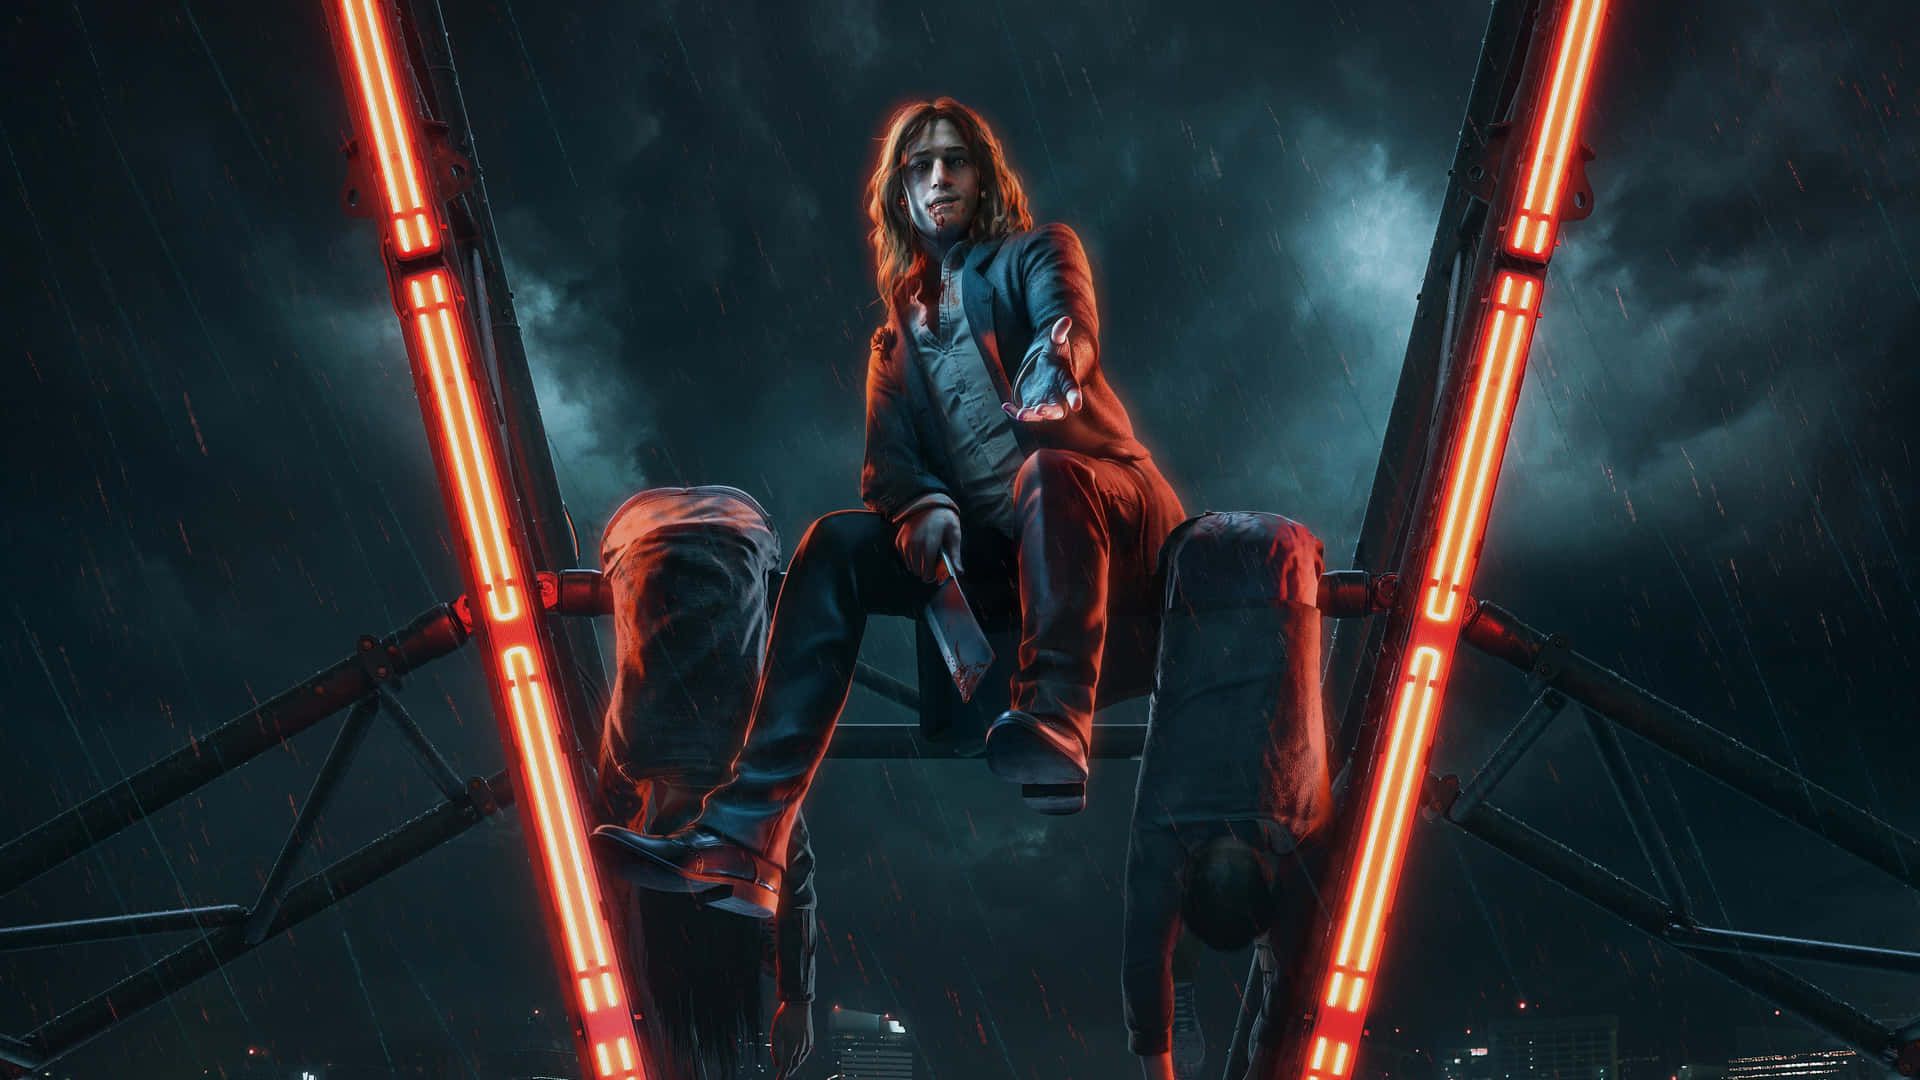 A red-haired woman in a red suit sits on a metal structure with red neon lights - Vampire